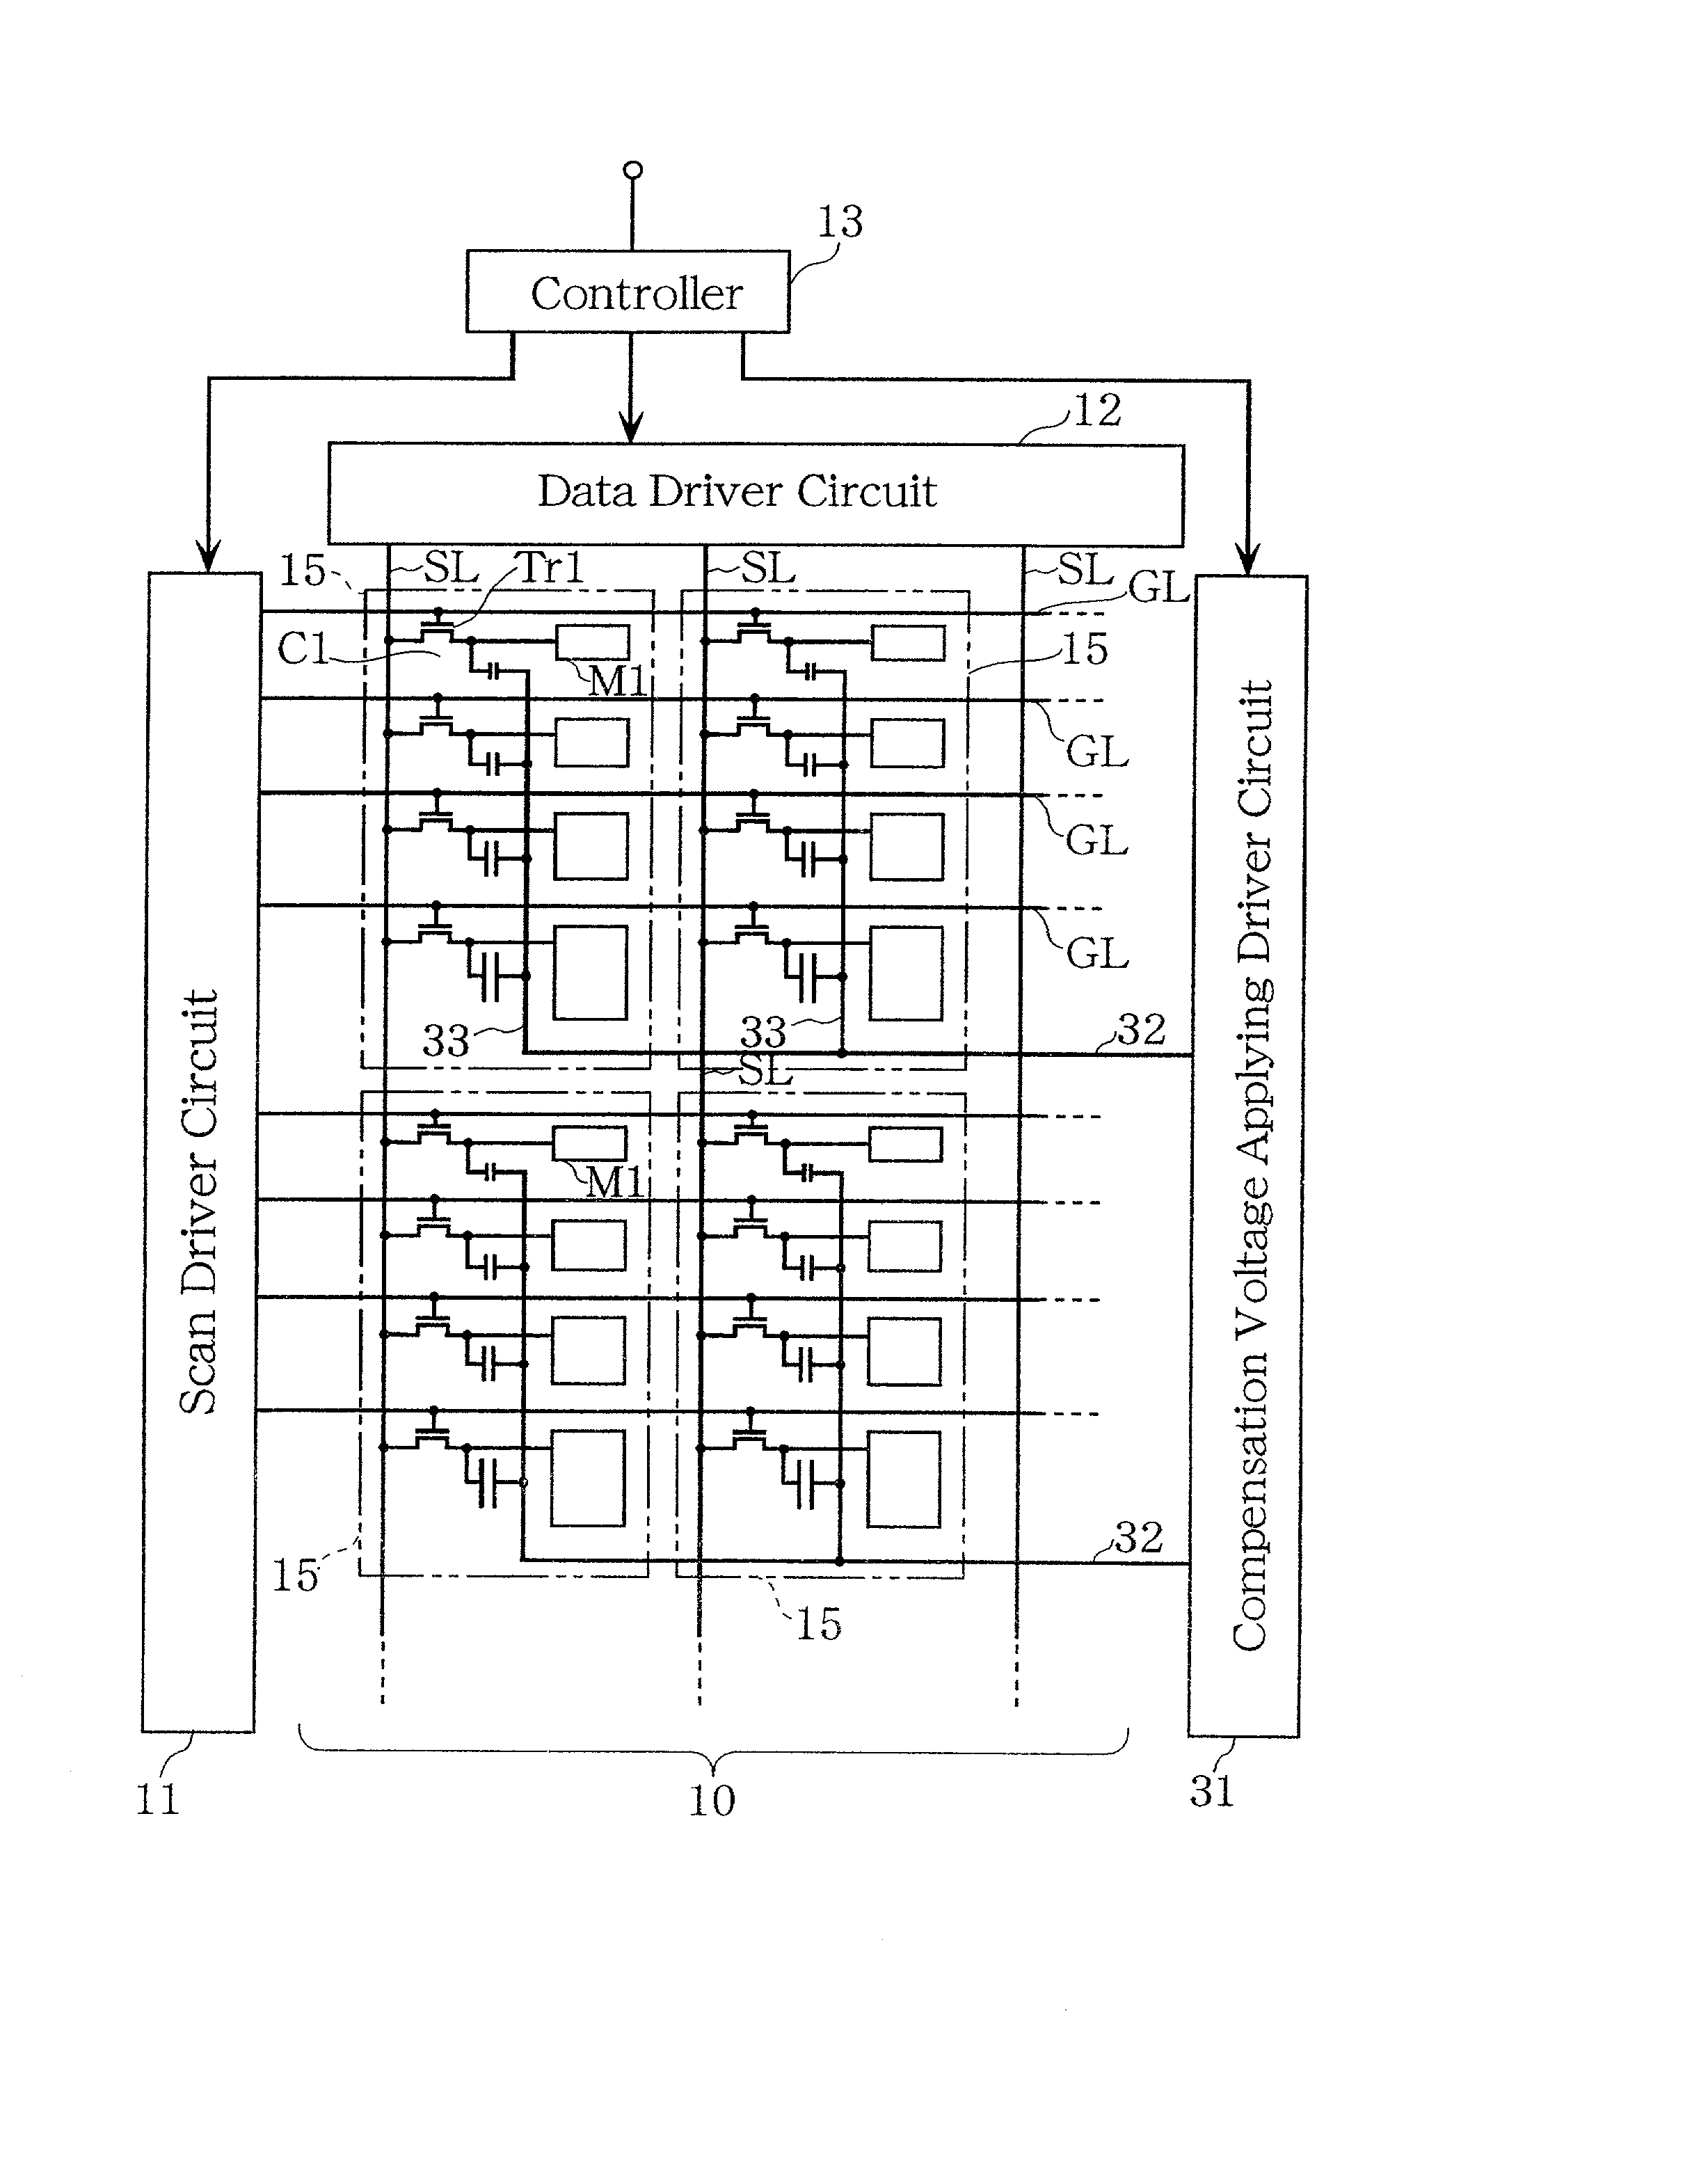 Liquid crystal display device, electroluminescent display device, method of driving the devices, and method of evaluating subpixel arrangement patterns